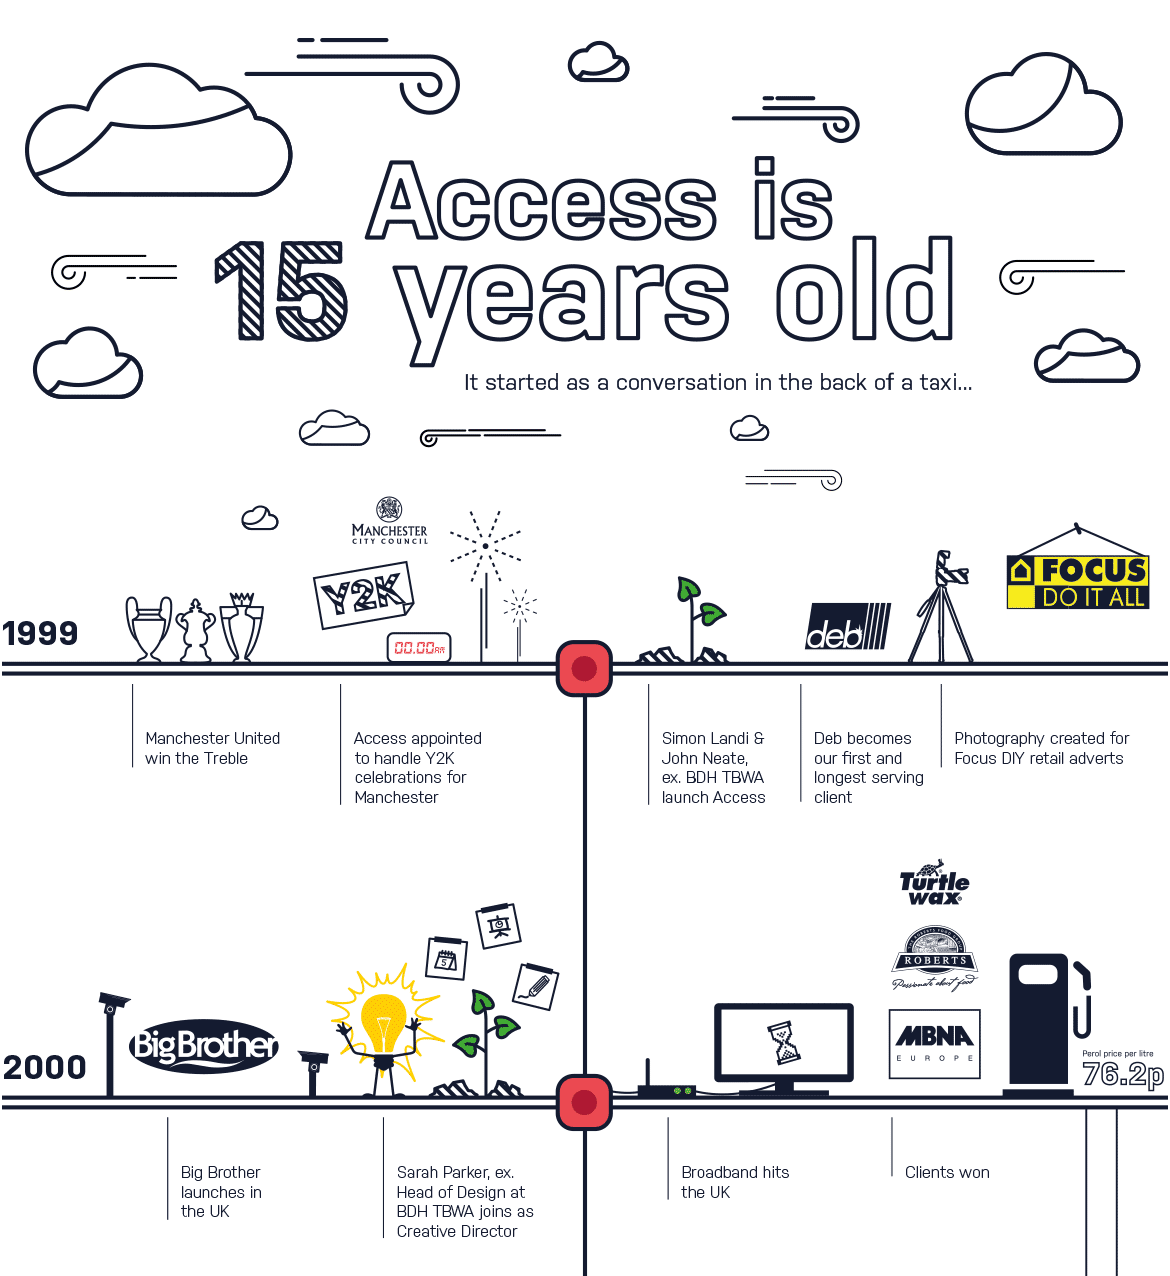 Access is 15 years old - part 1